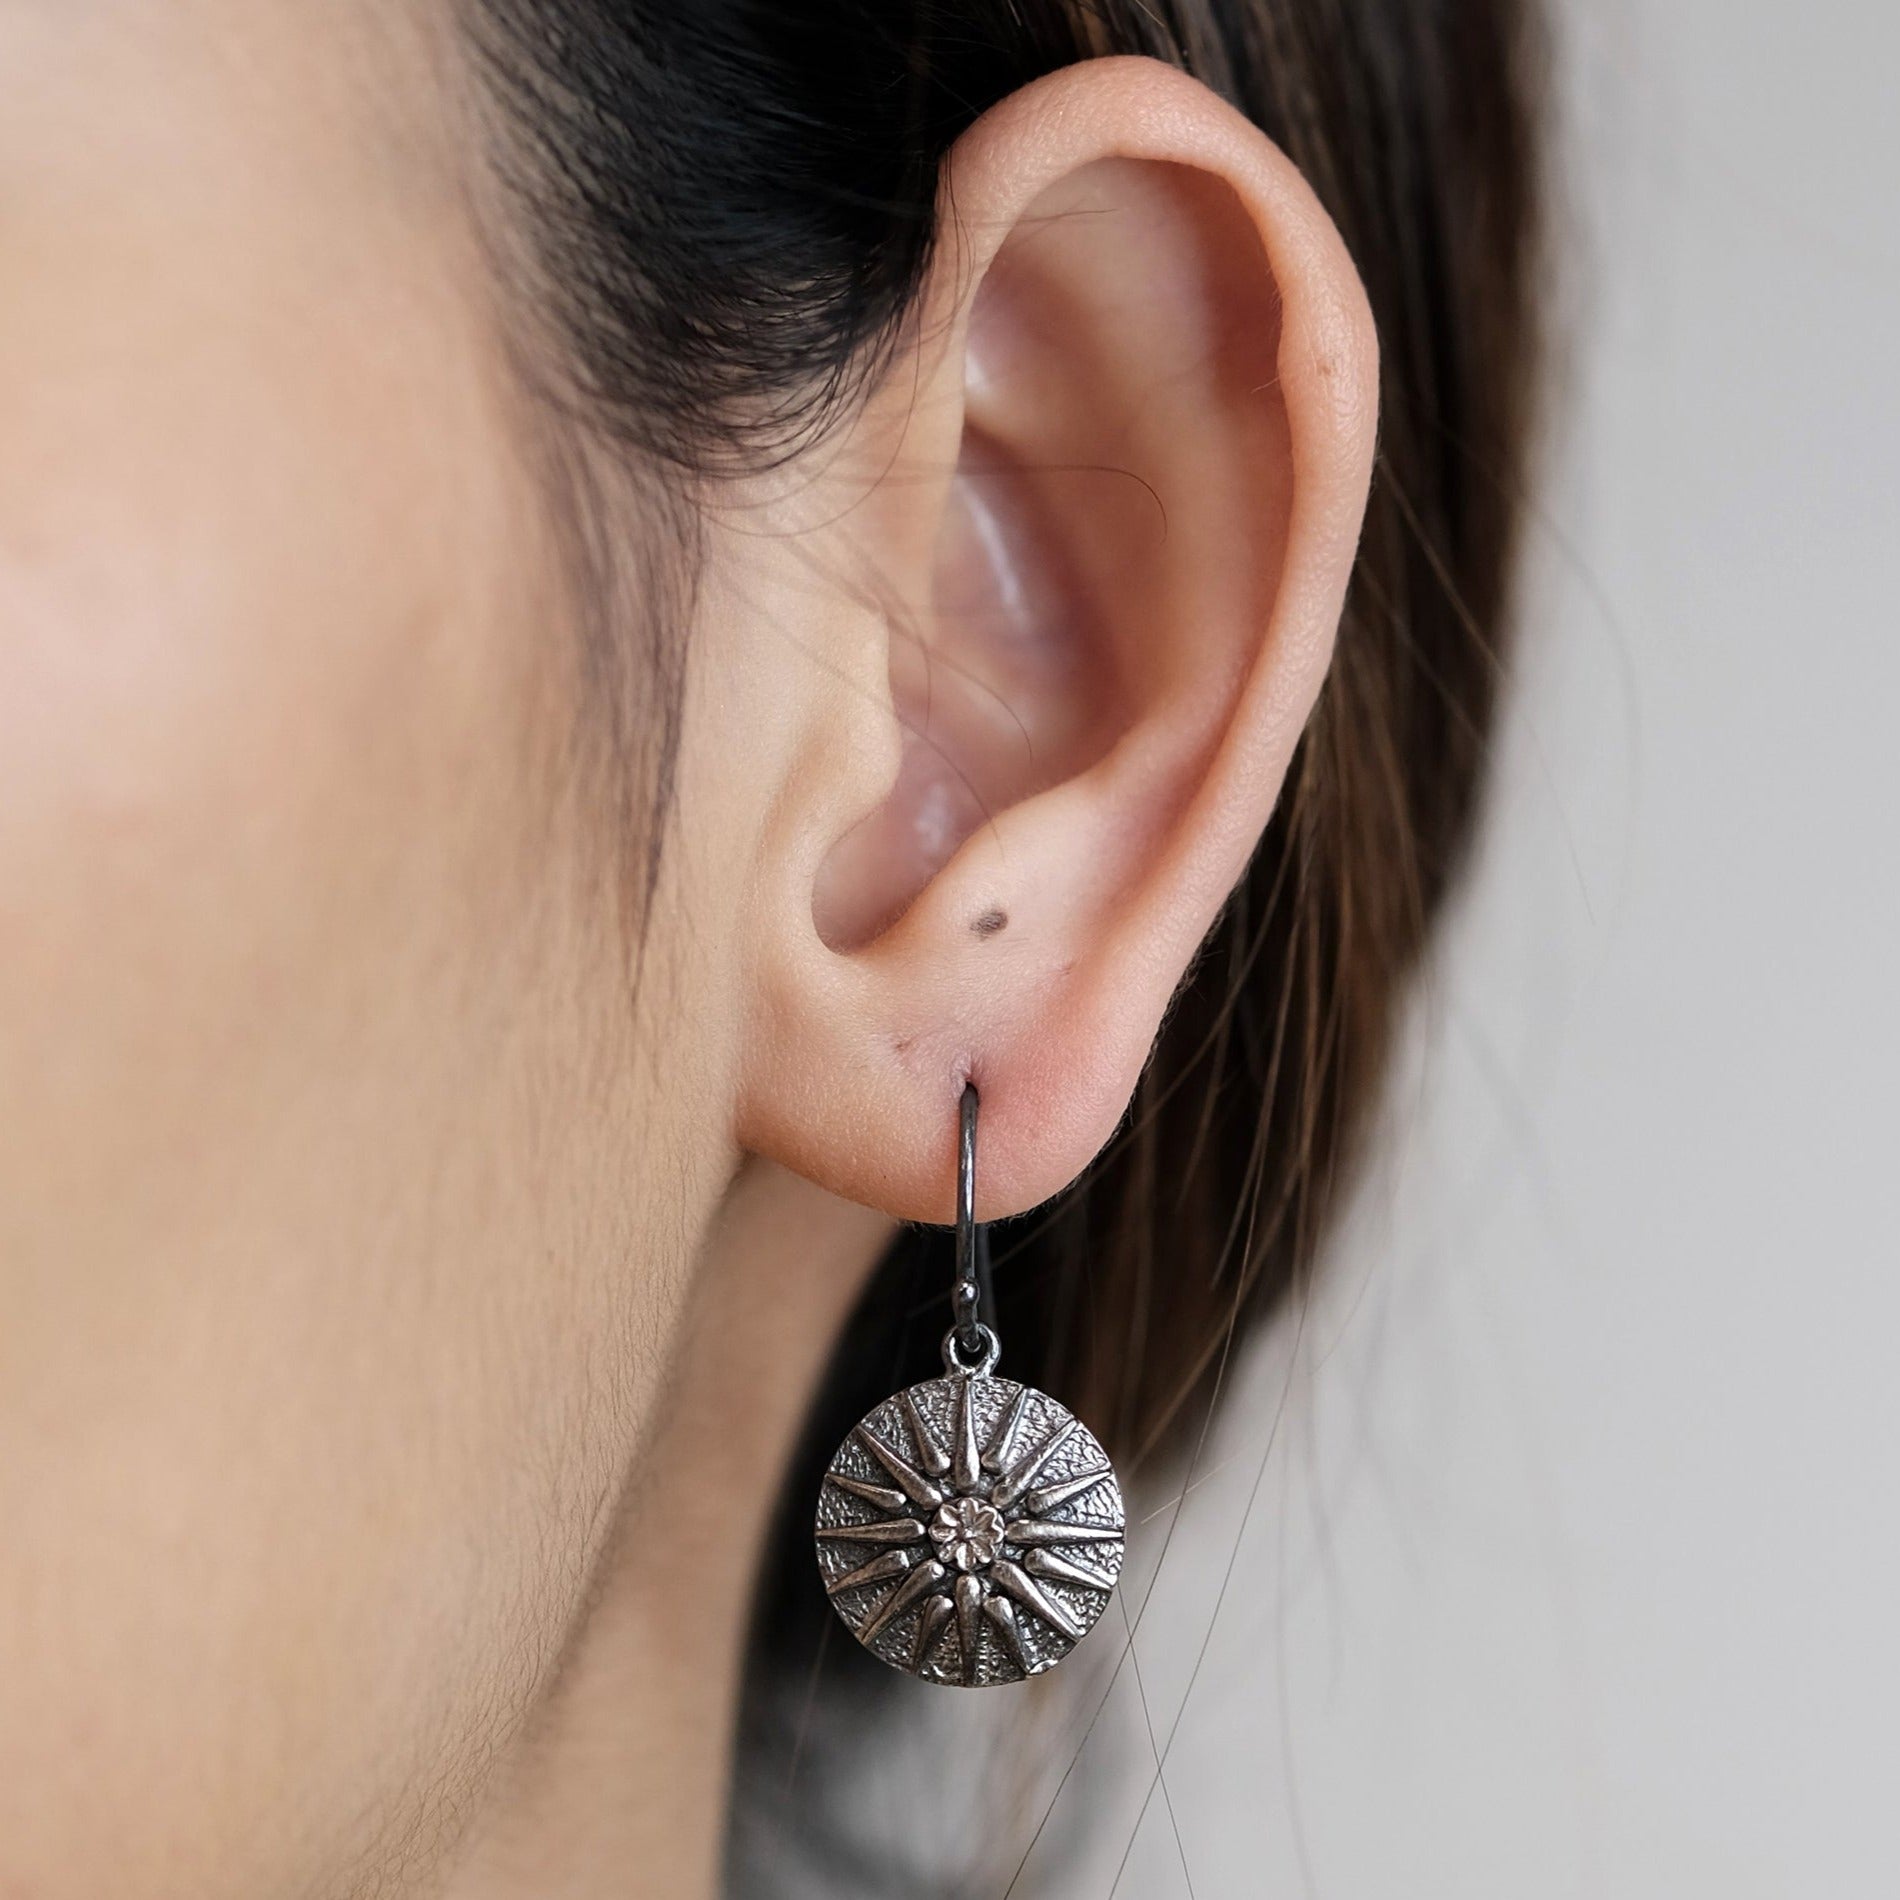 The Madstone star compass earrings